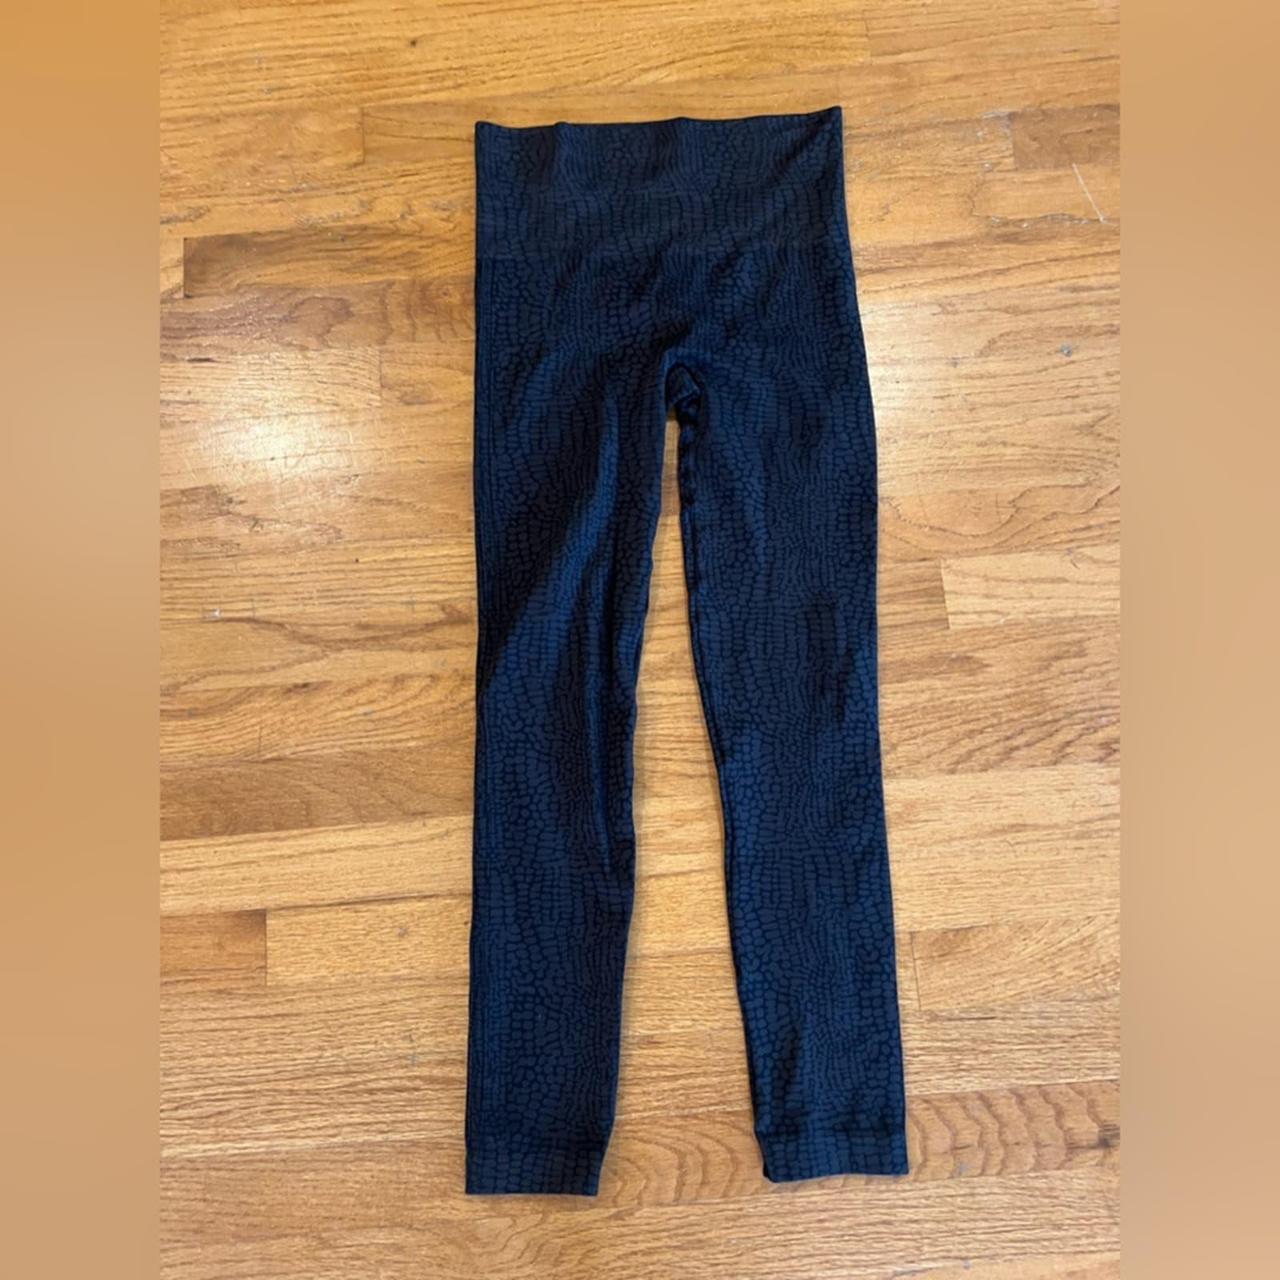 Spanx leggings by Sara Blakely faux leather high - Depop